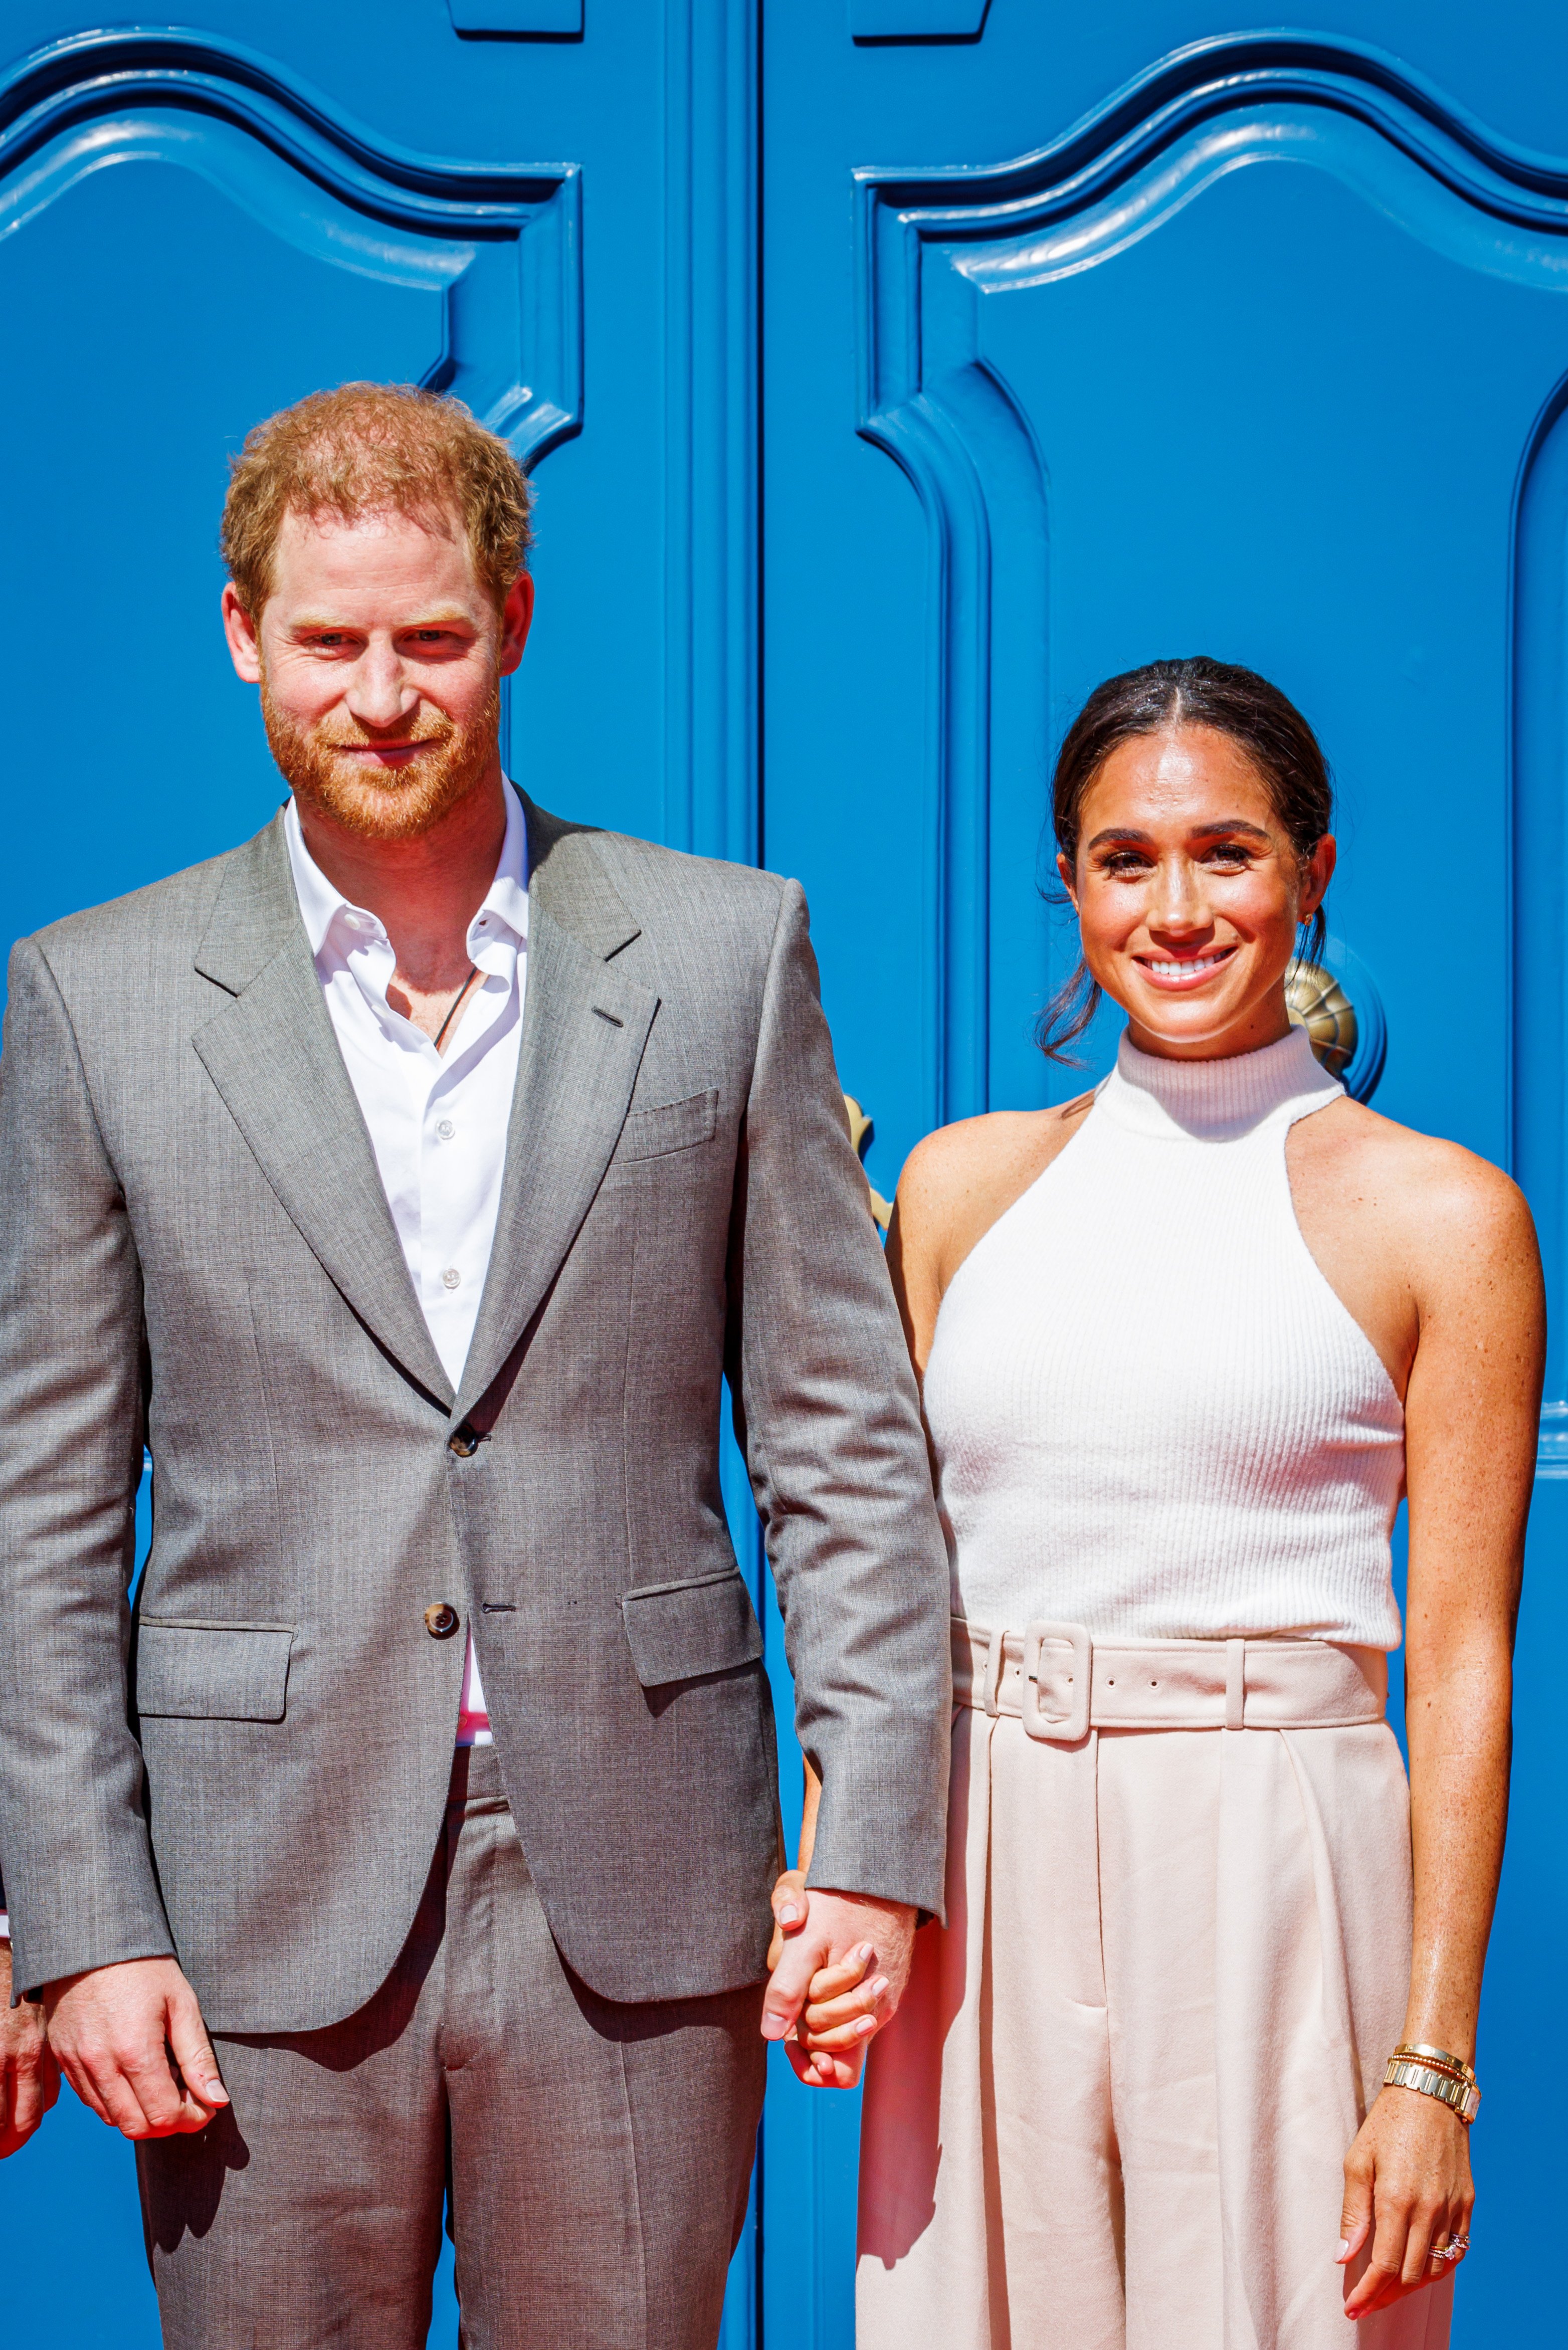 Prince Harry and his wife Meghan Markle visiting the city hall during the Invictus Games Dusseldorf 2023 - One Year To Go events on September 6, 2022 in Dusseldorf, Germany | Source: Getty Images